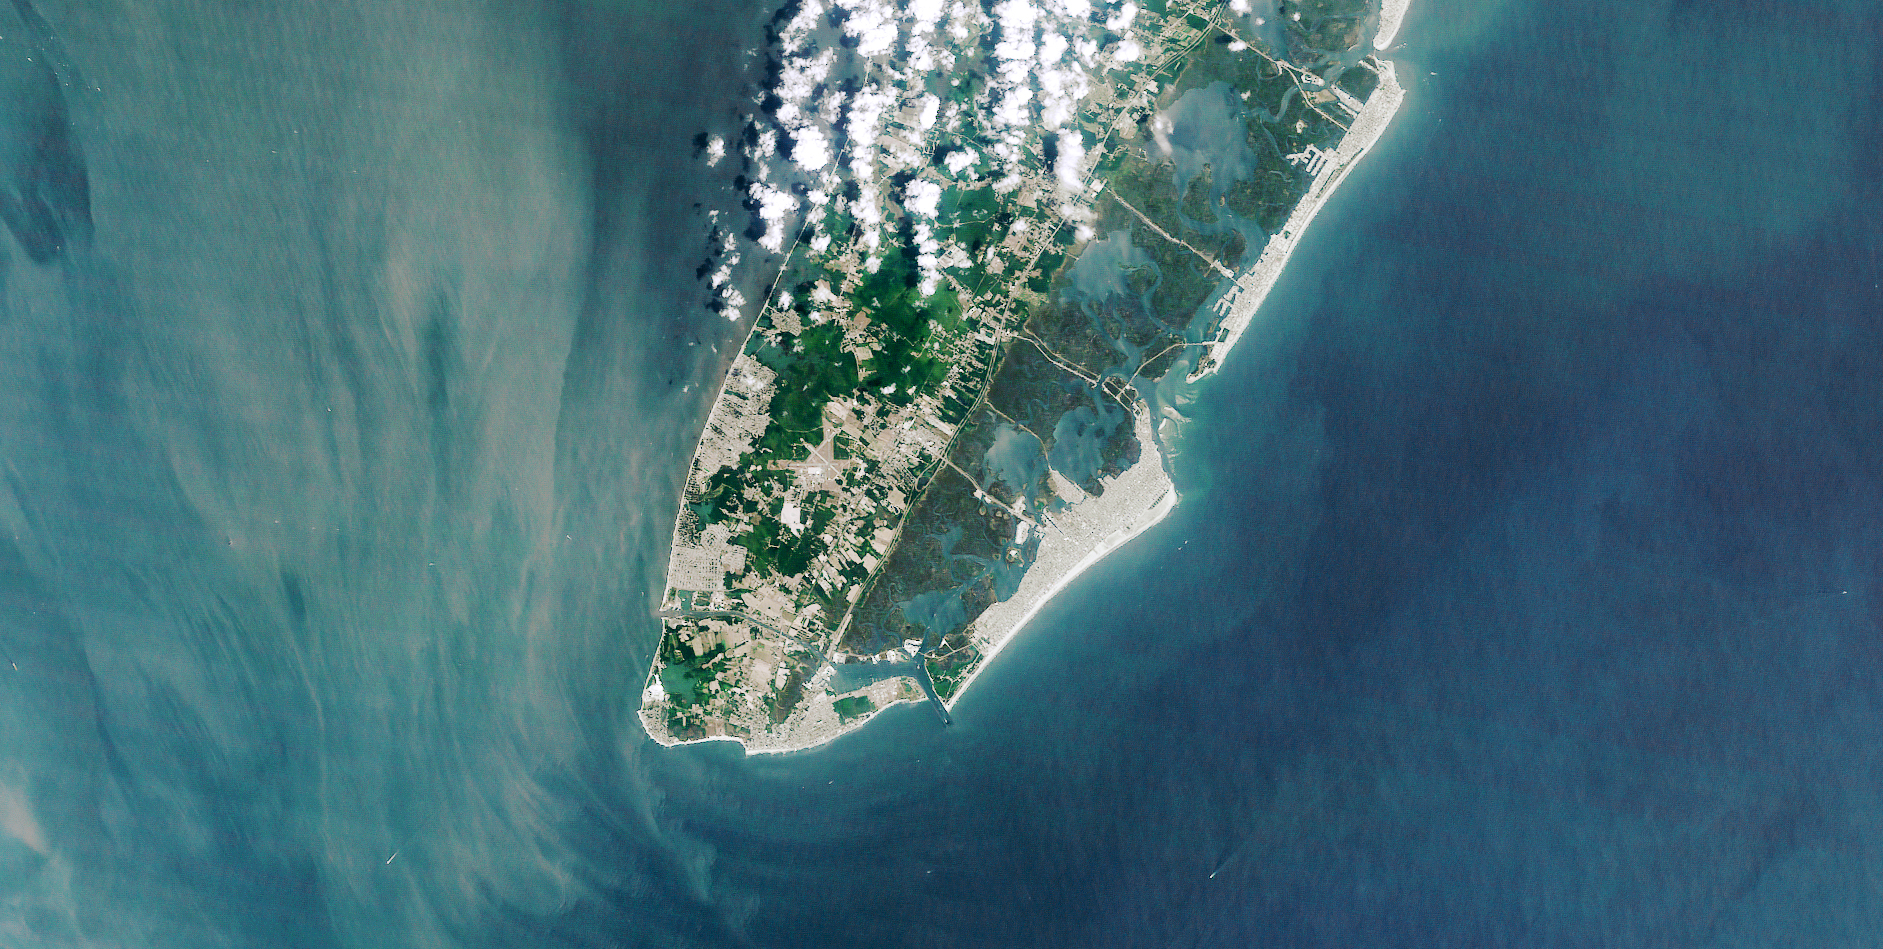 NASA Returns to the Beach: Wide Wildwood Beaches - related image preview